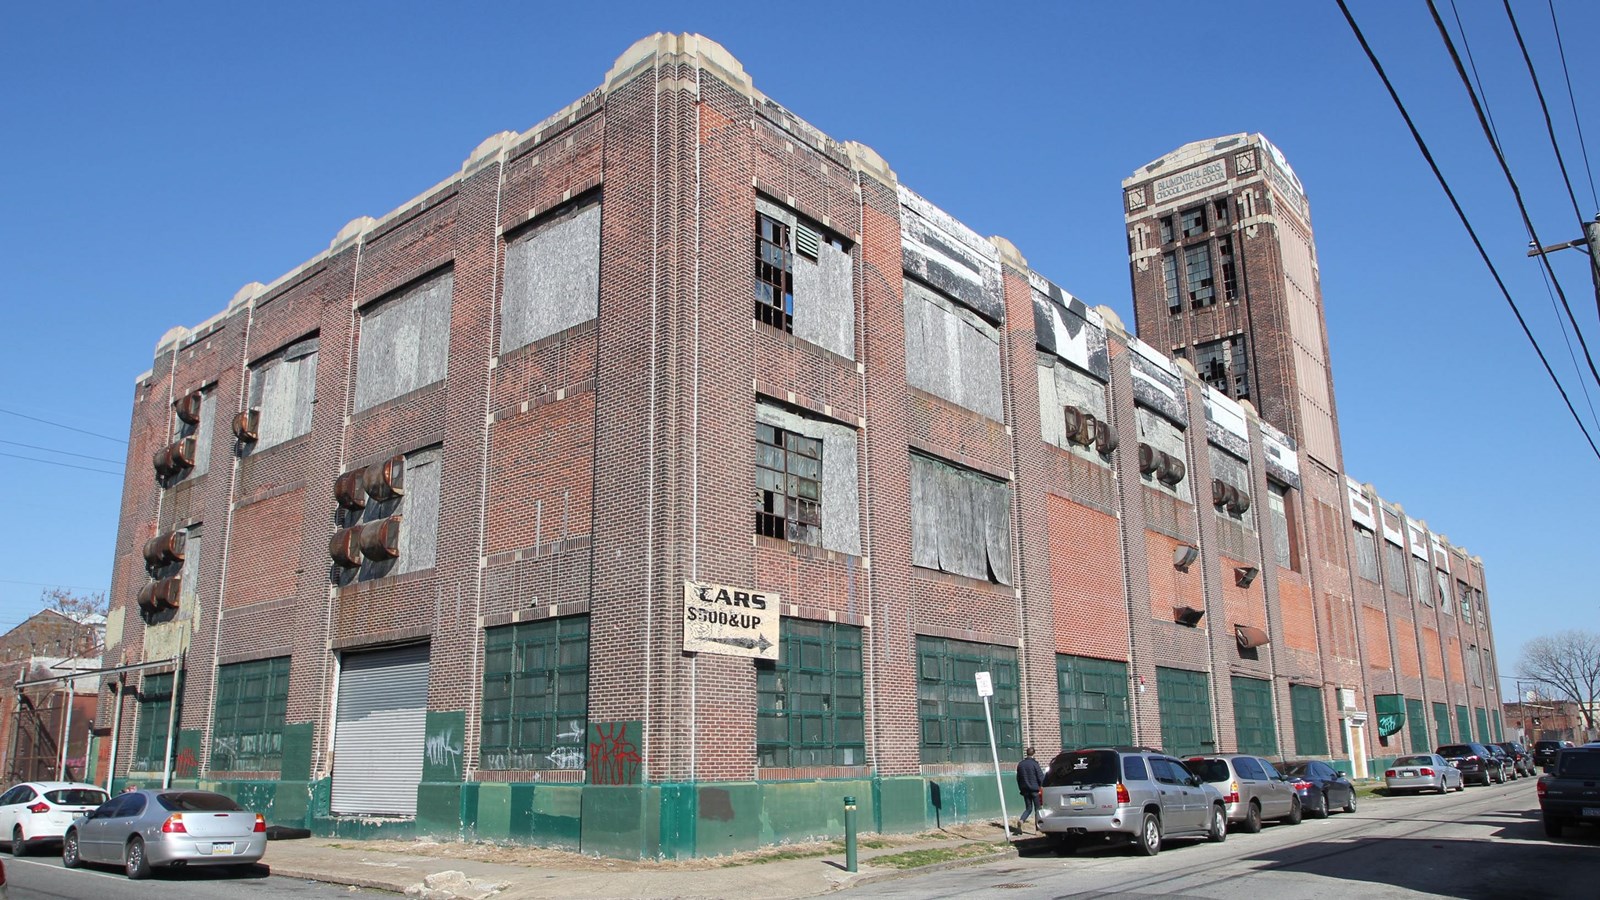 Three story brick factory building with boarded windows